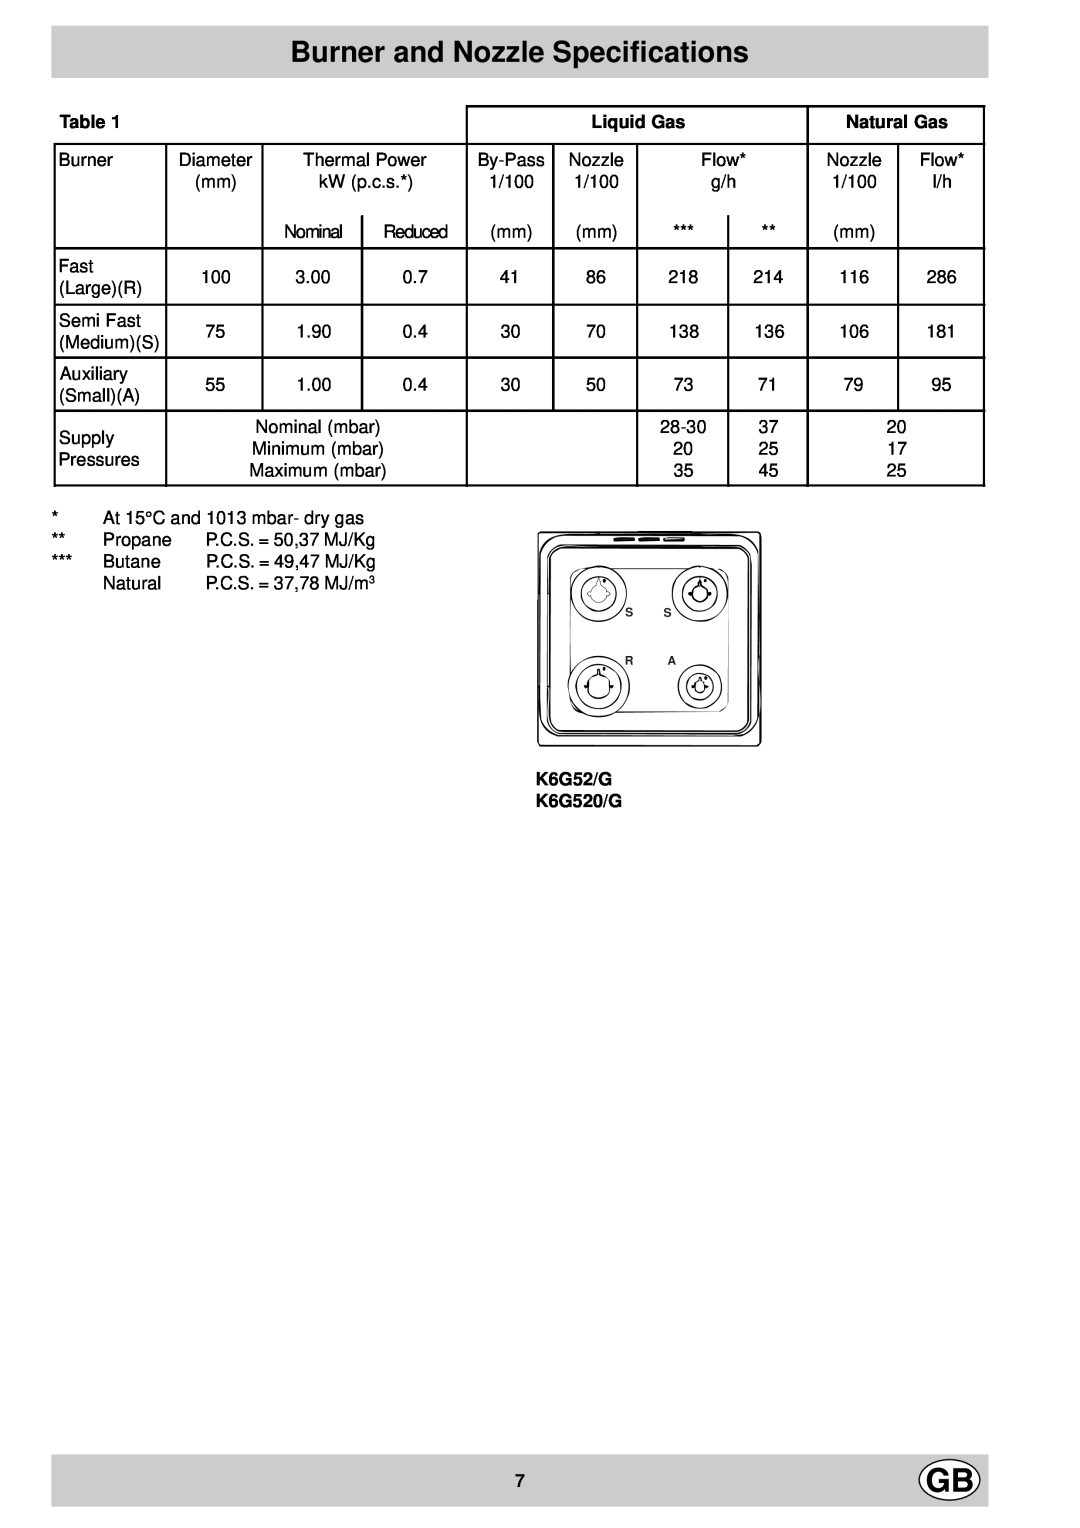 Indesit manual Burner and Nozzle Specifications, Liquid Gas, Natural Gas, K6G52/G K6G520/G 